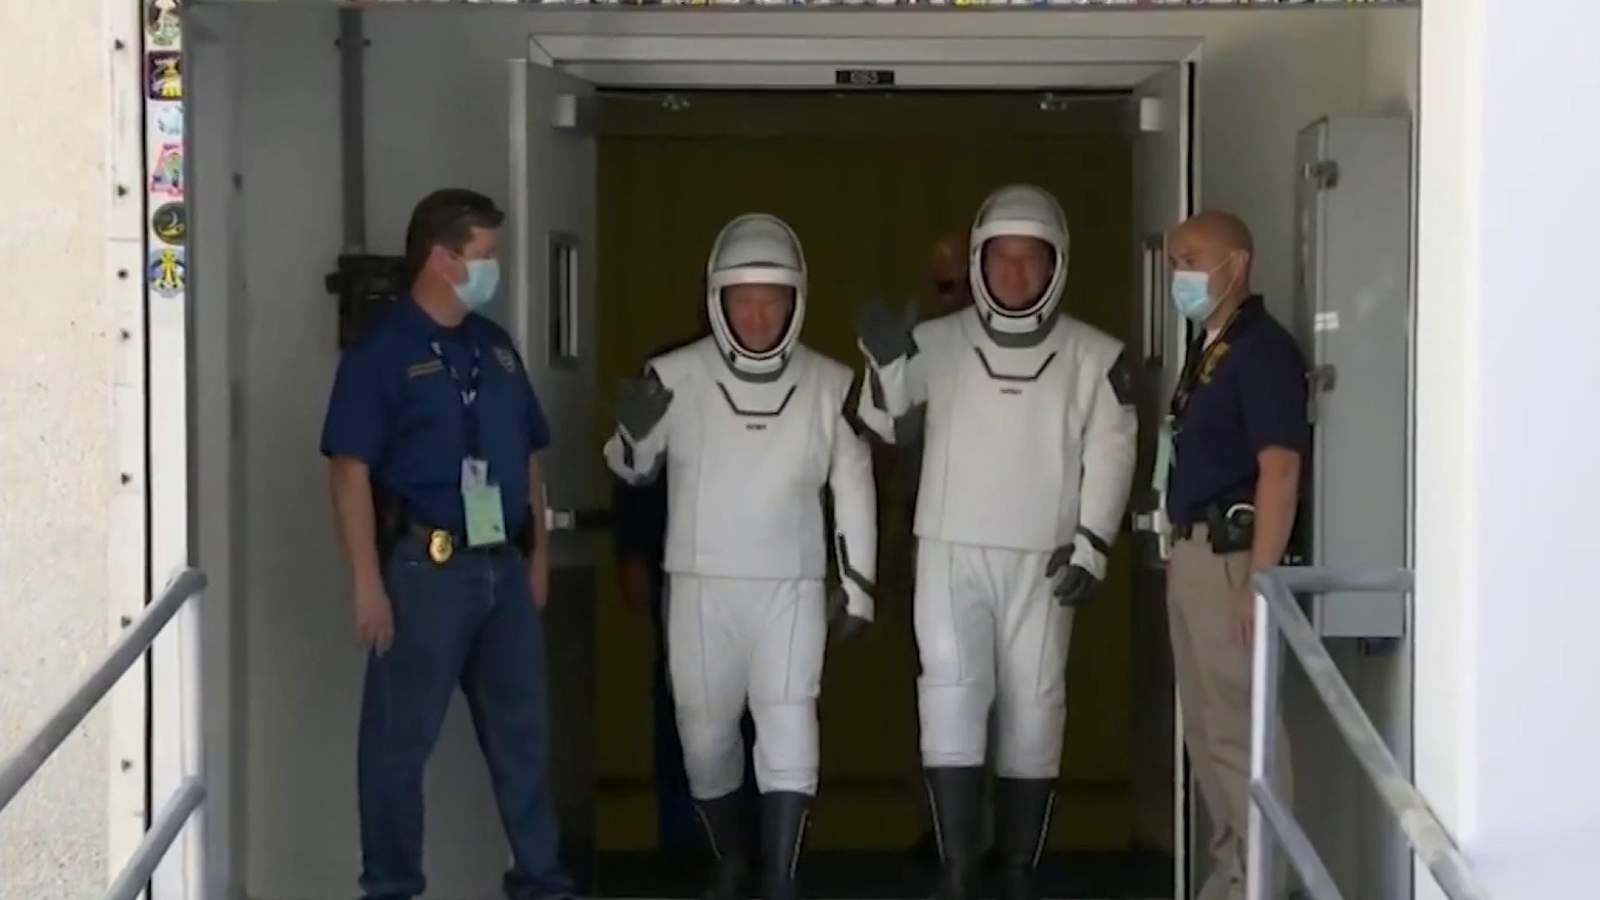 Space Coast residents buzzing ahead of historic astronaut launch